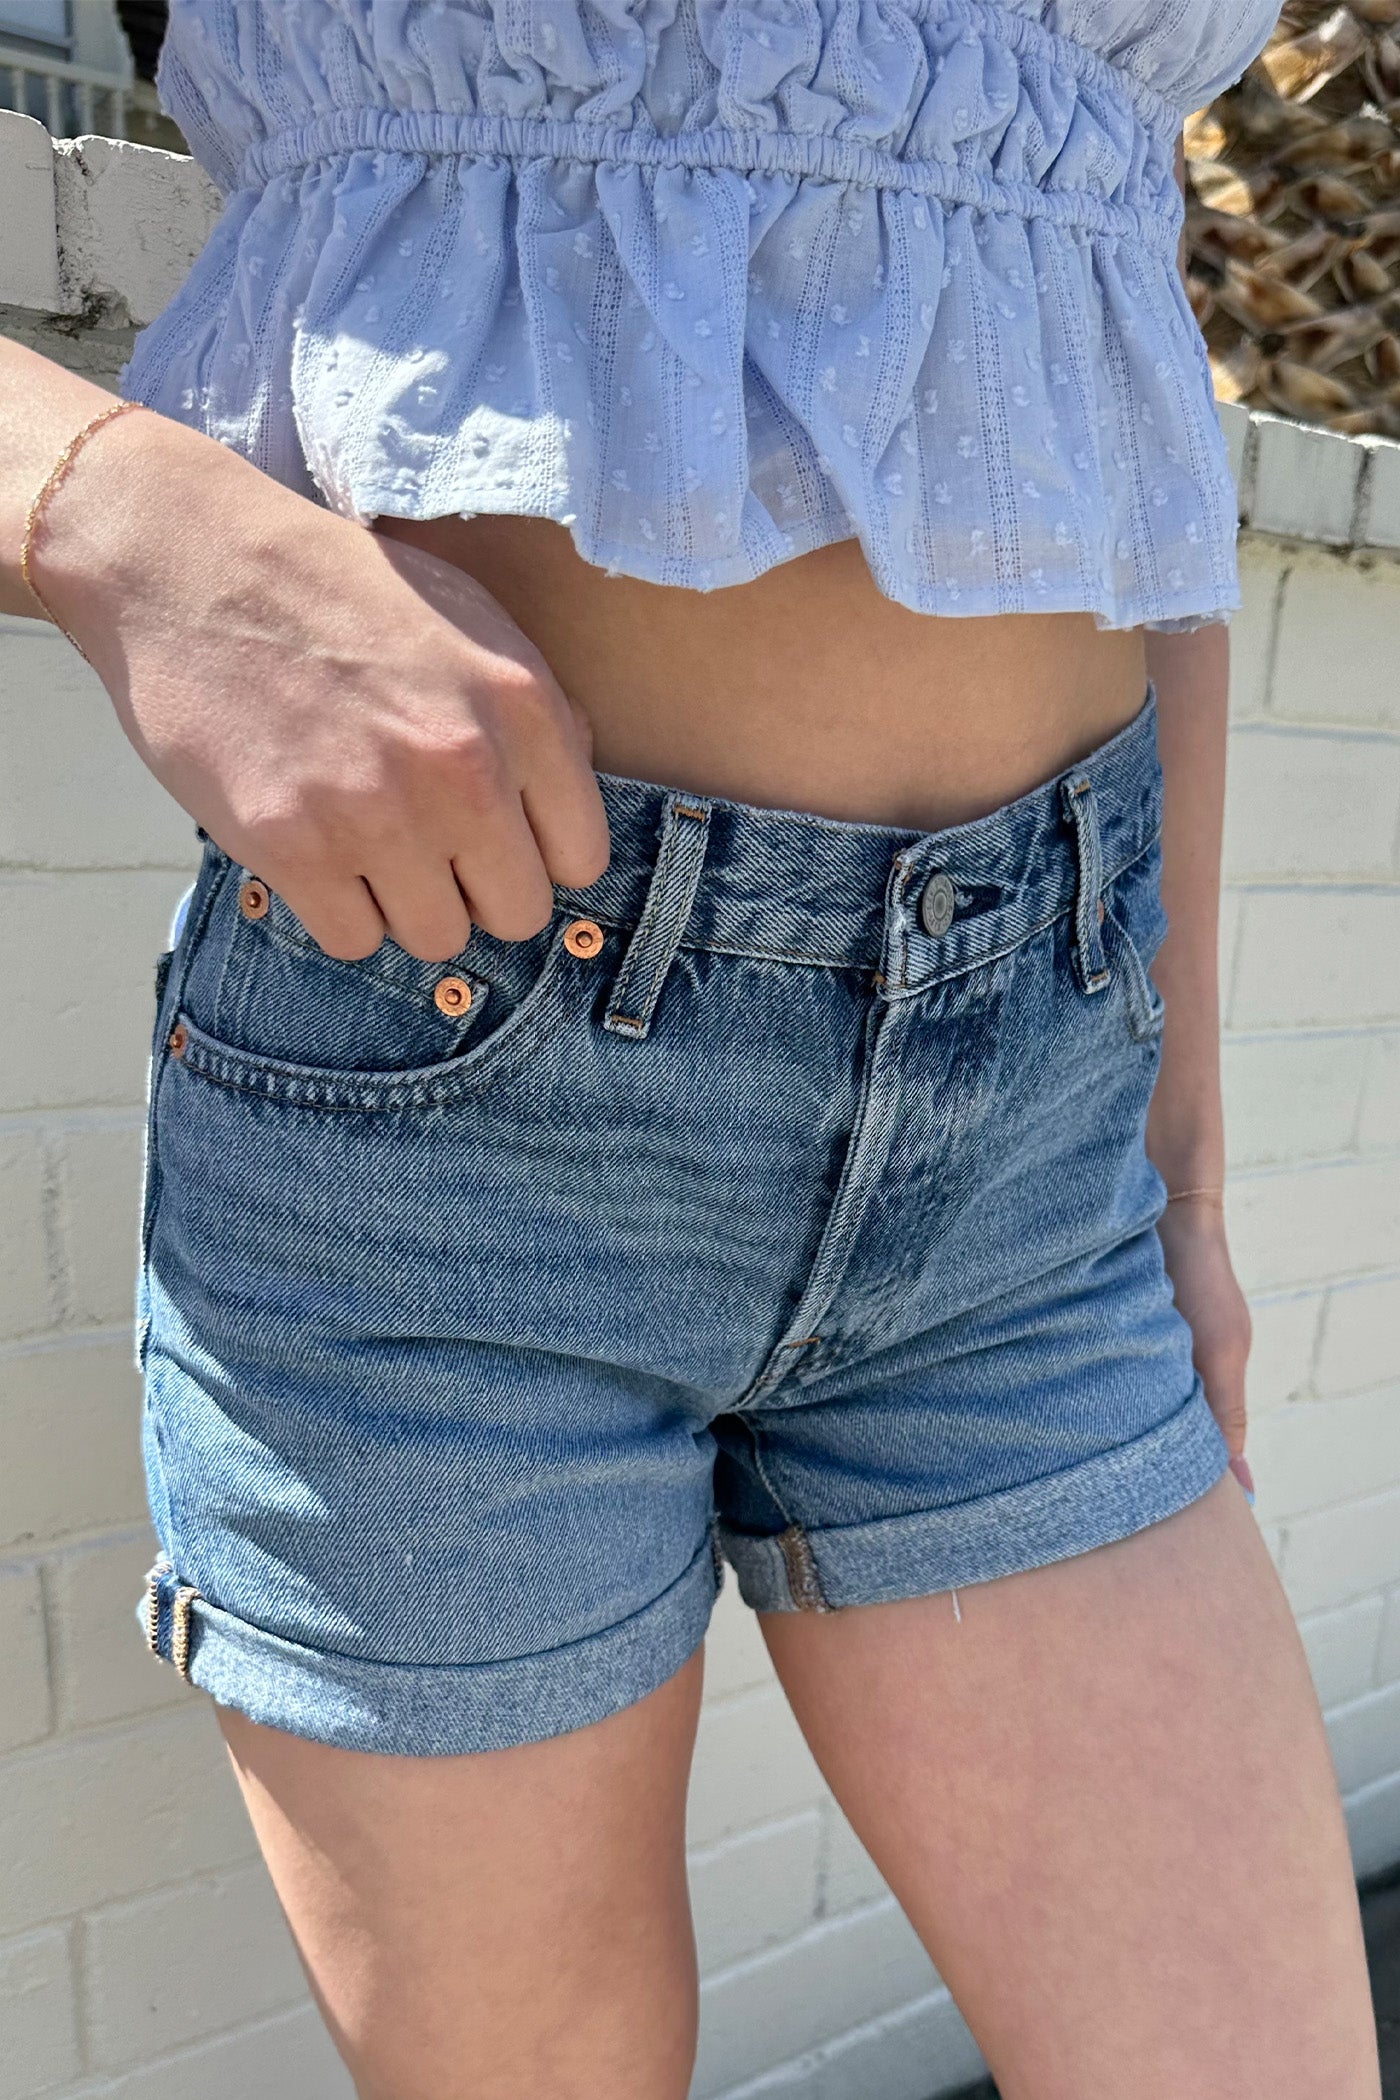 501 Rolled Denim Shorts by Levi's